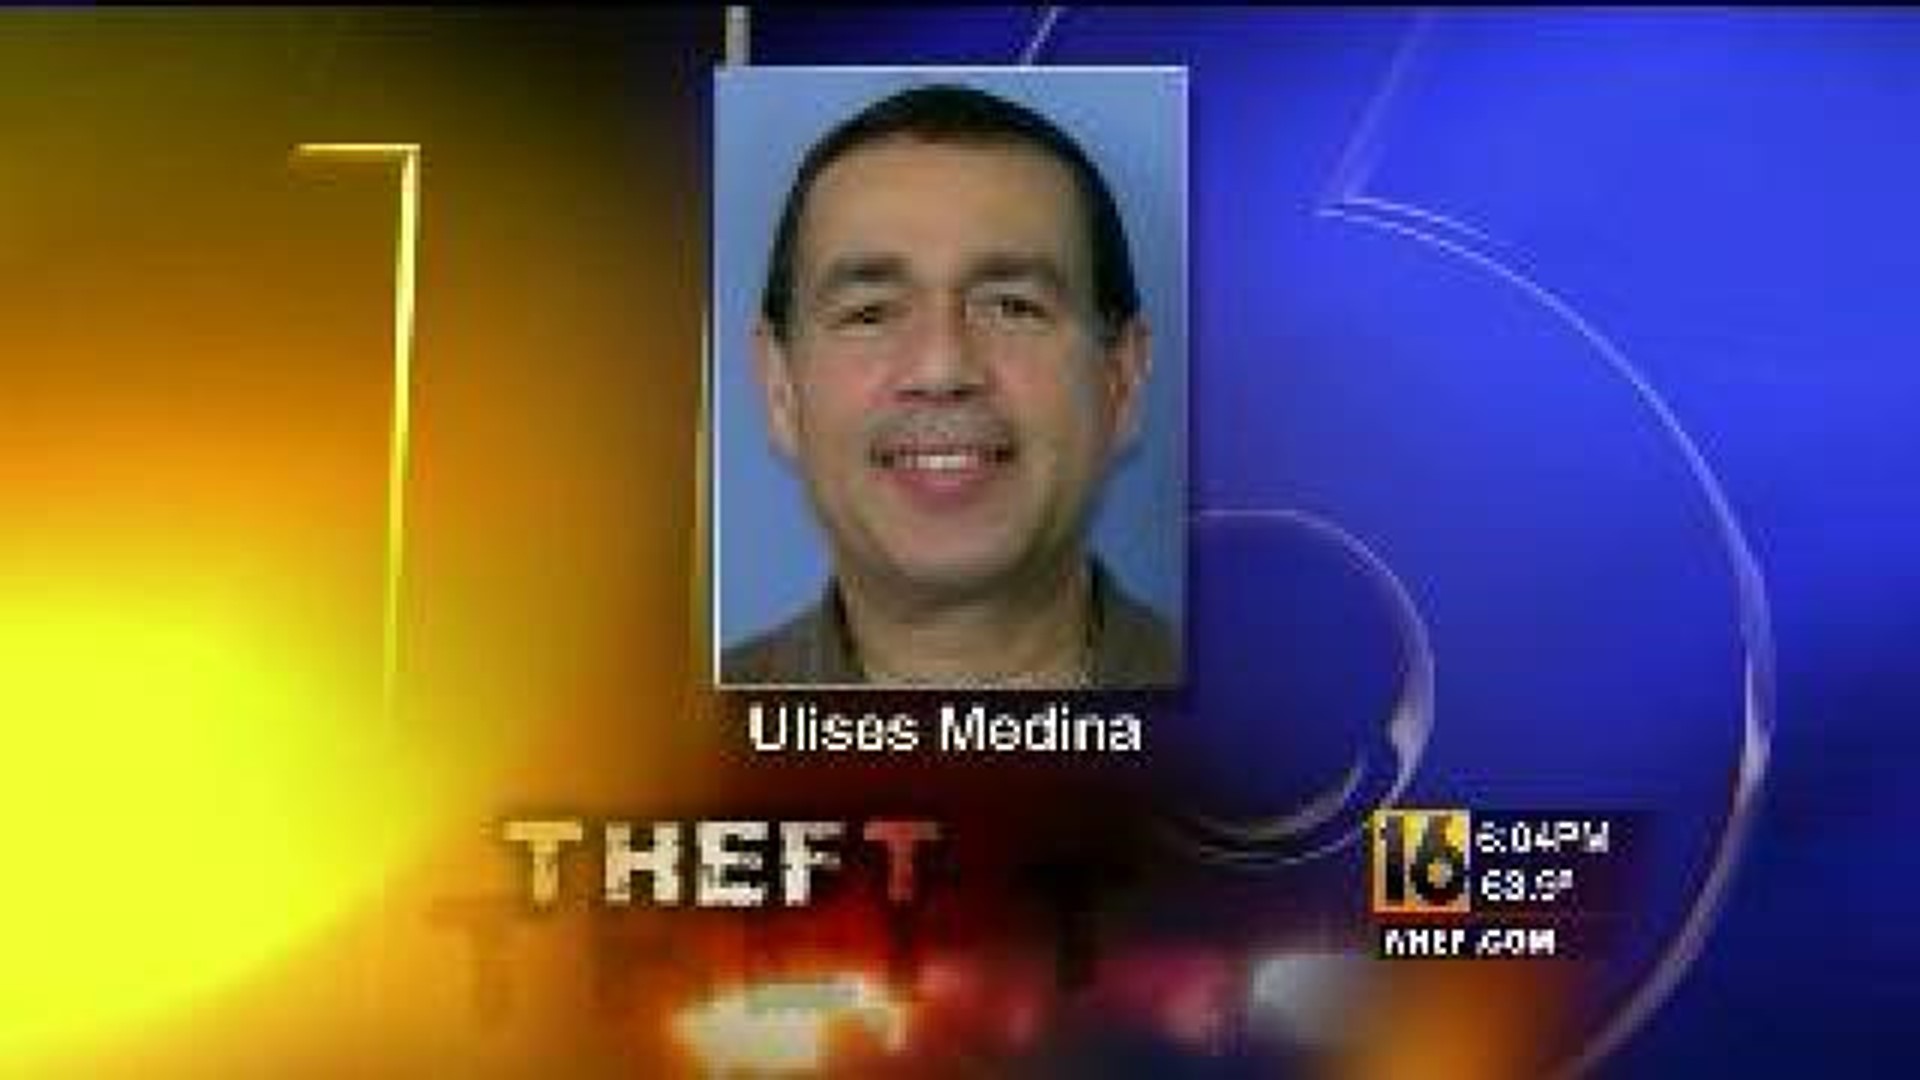 Man Accused of Stealing From Former Employer